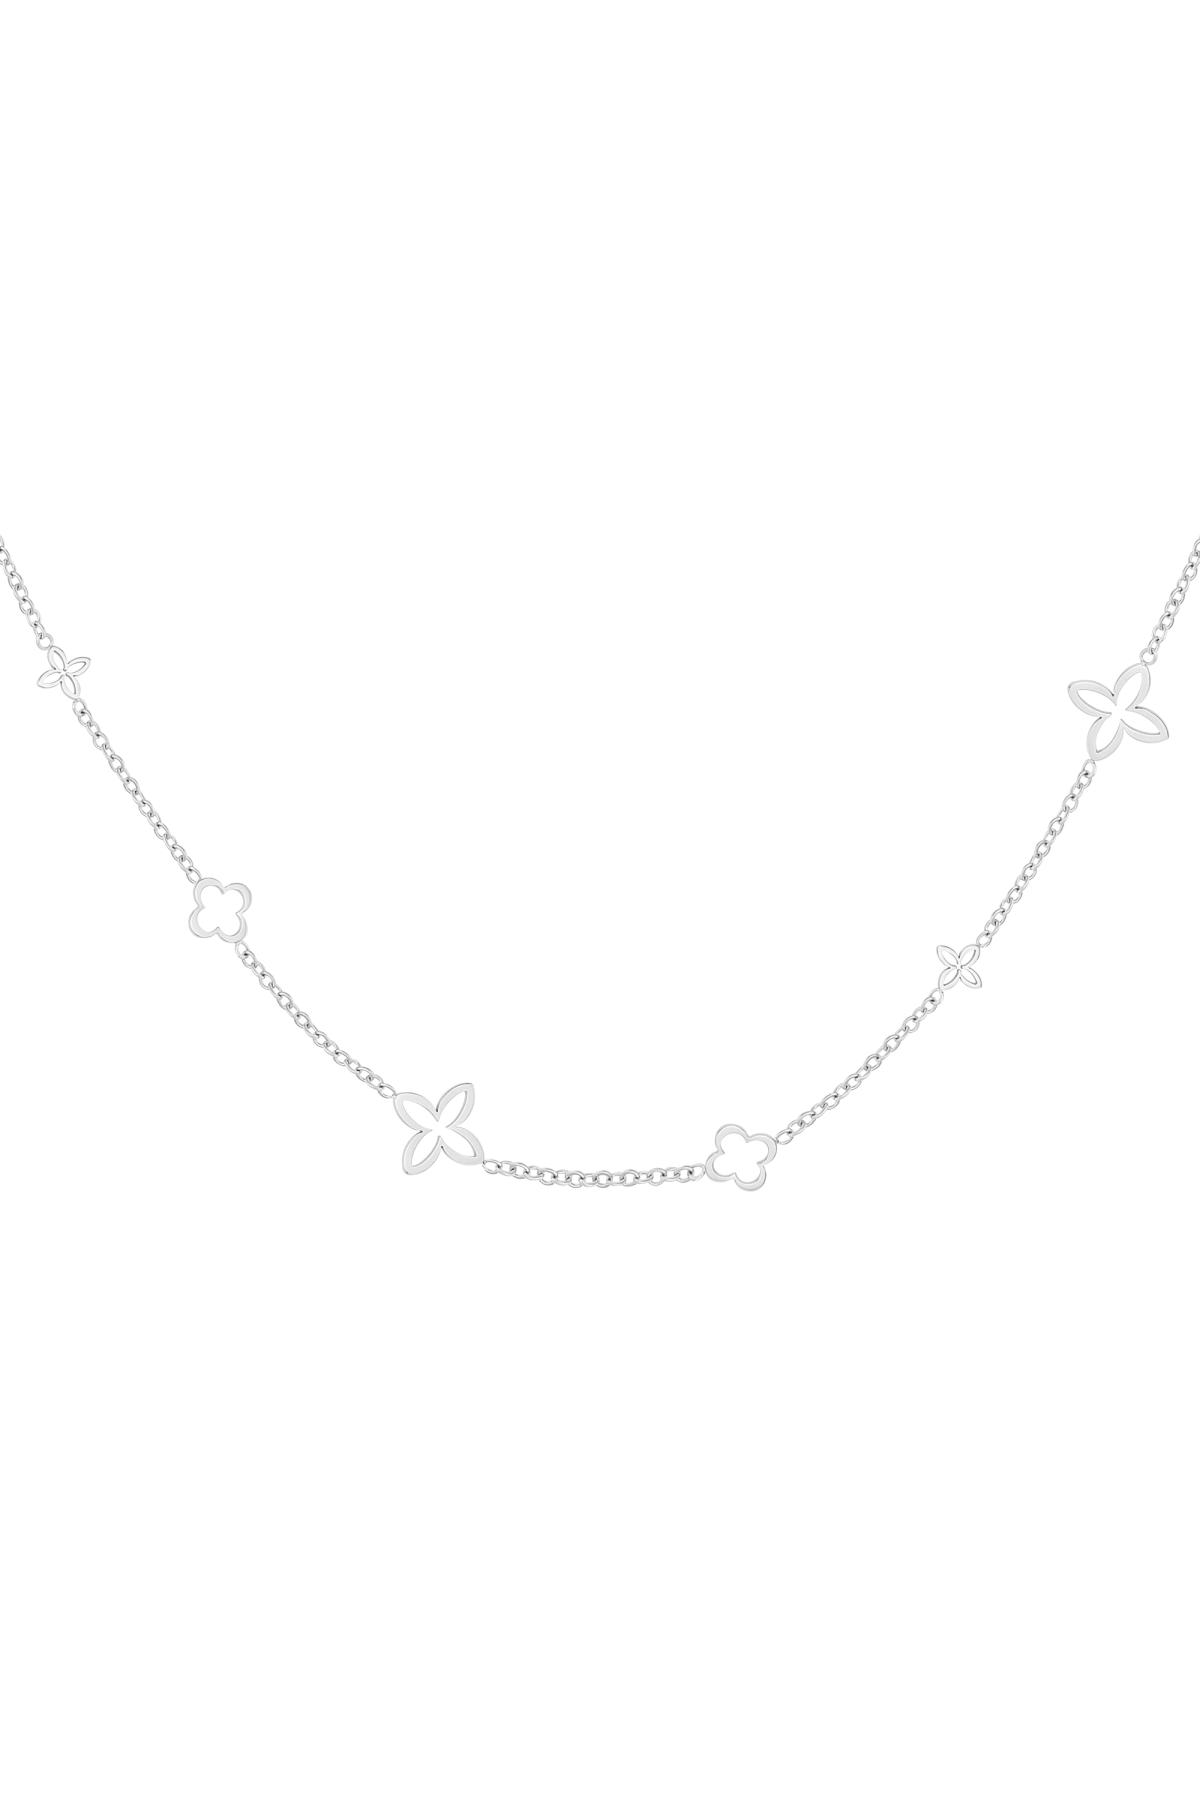 Minimalist charm necklace clovers Silver Stainless Steel